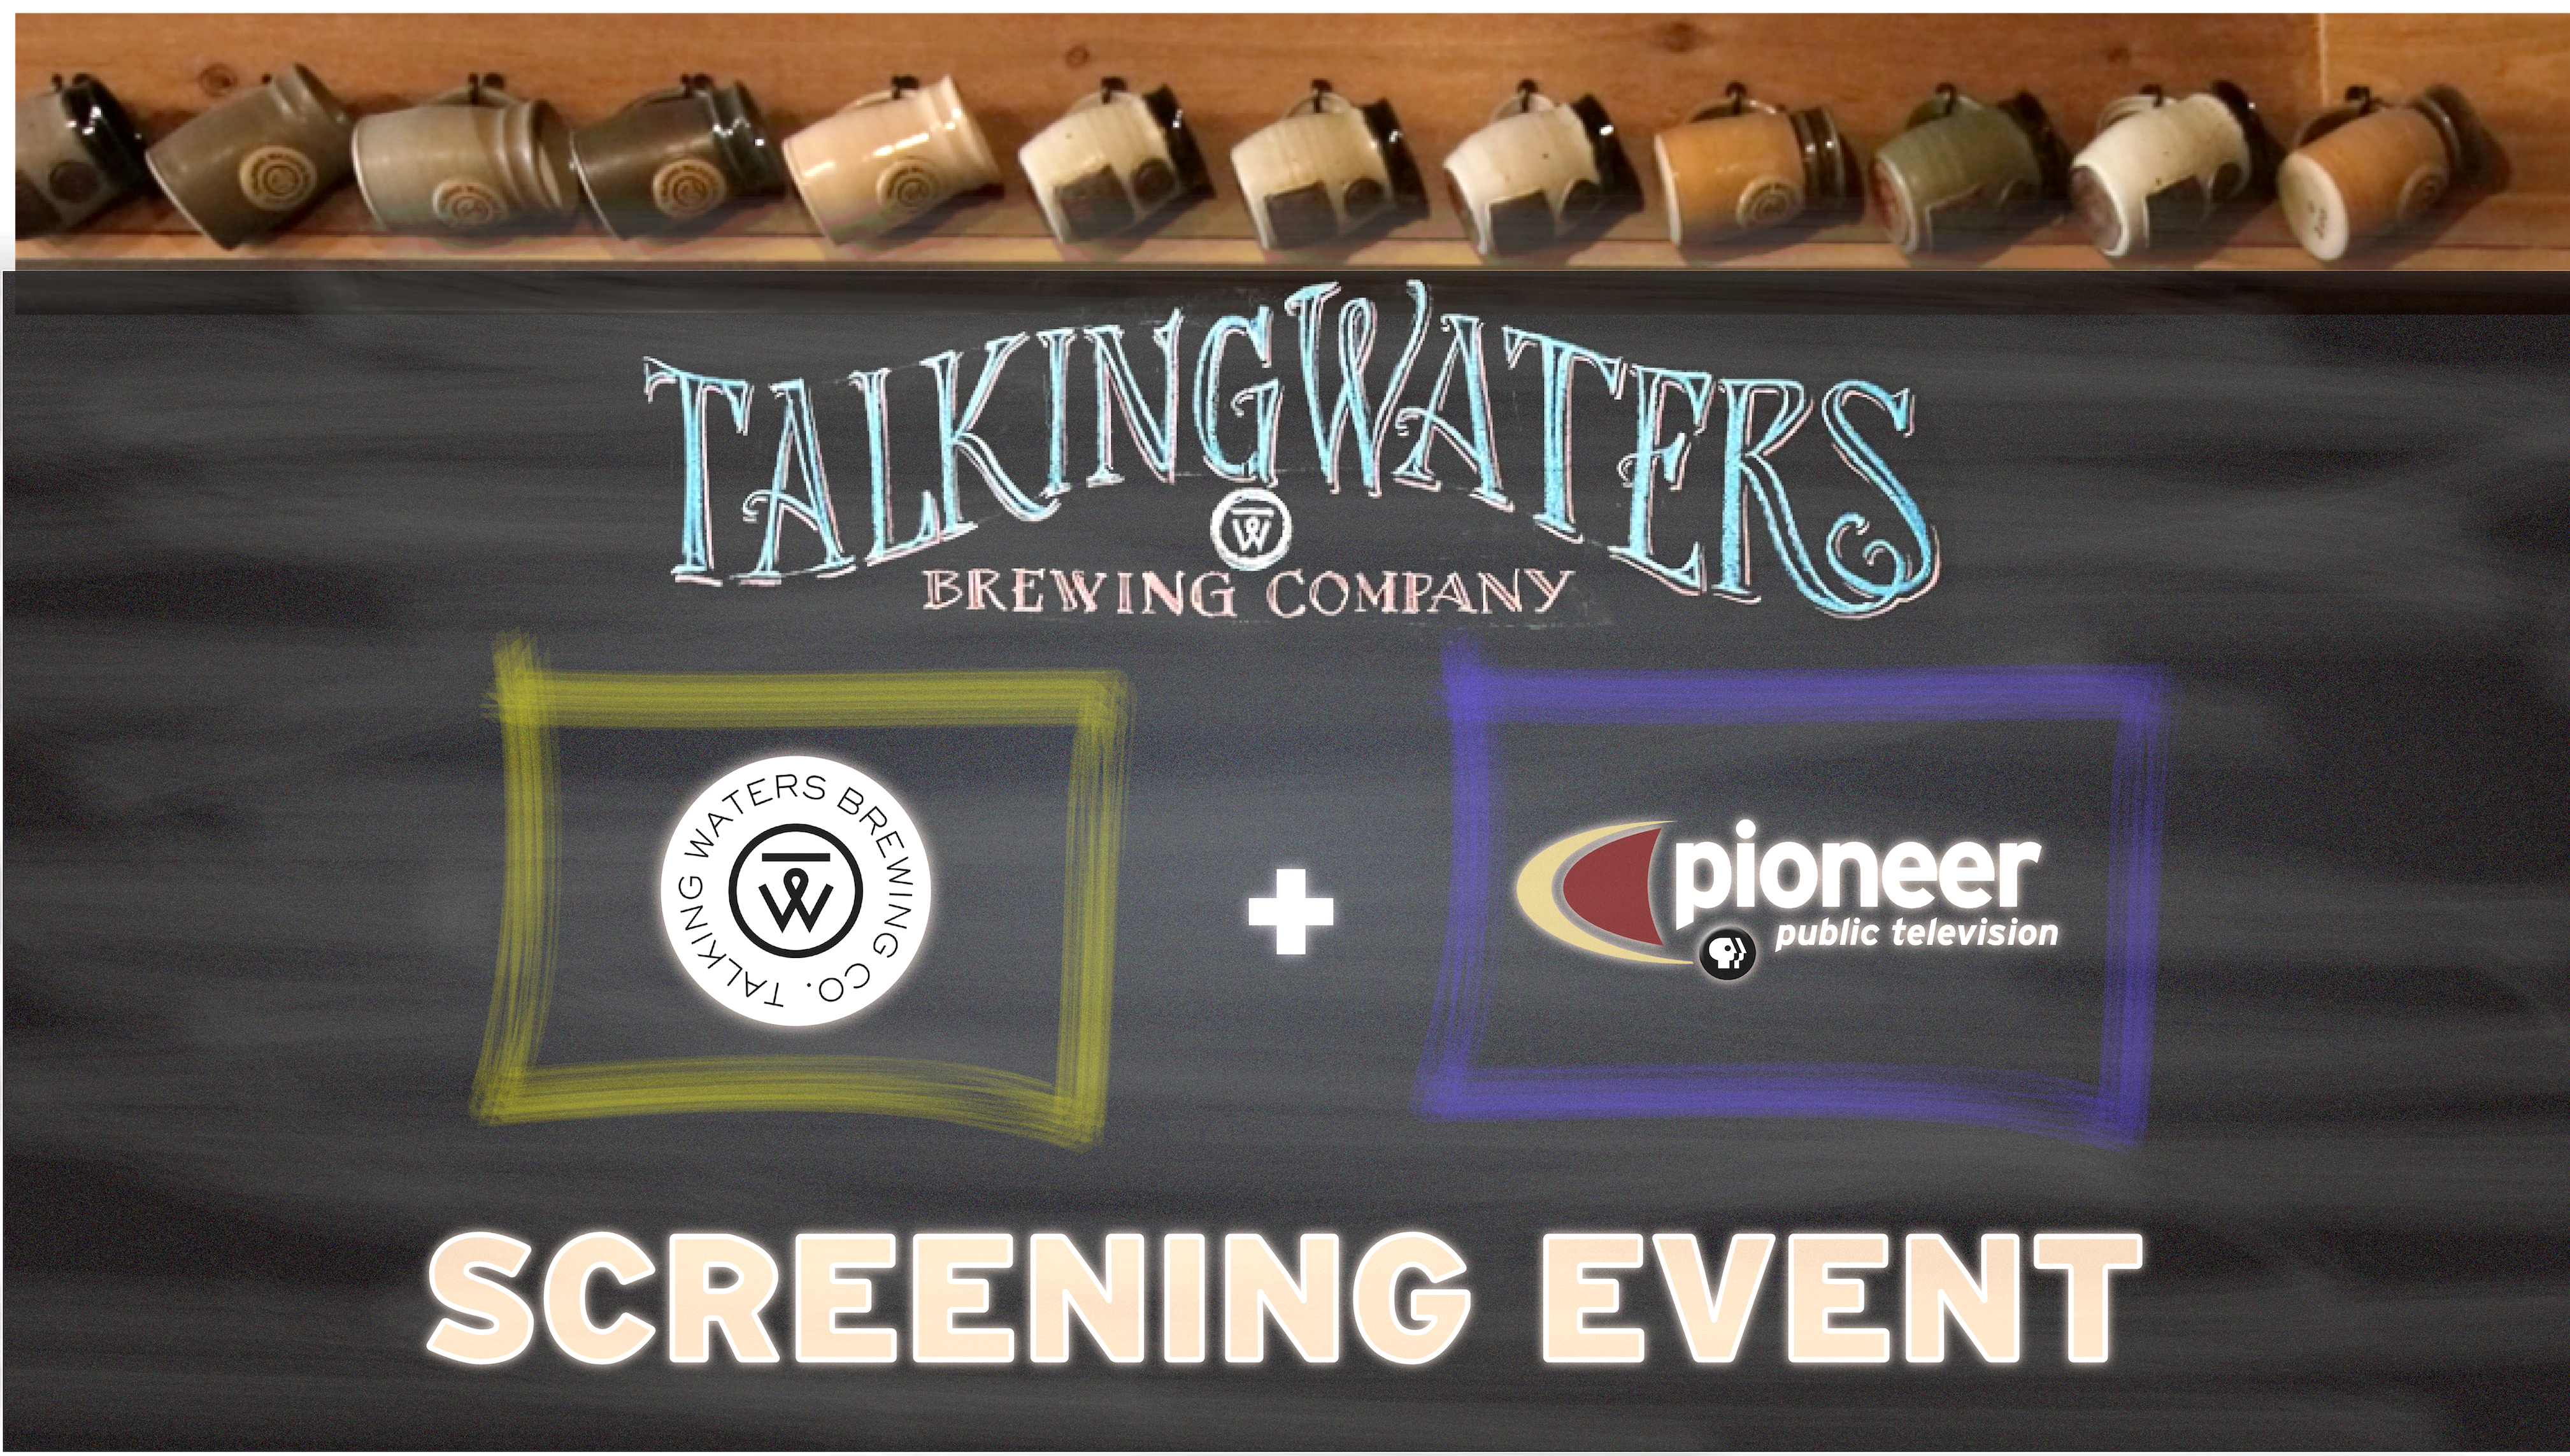 Attend a screening event